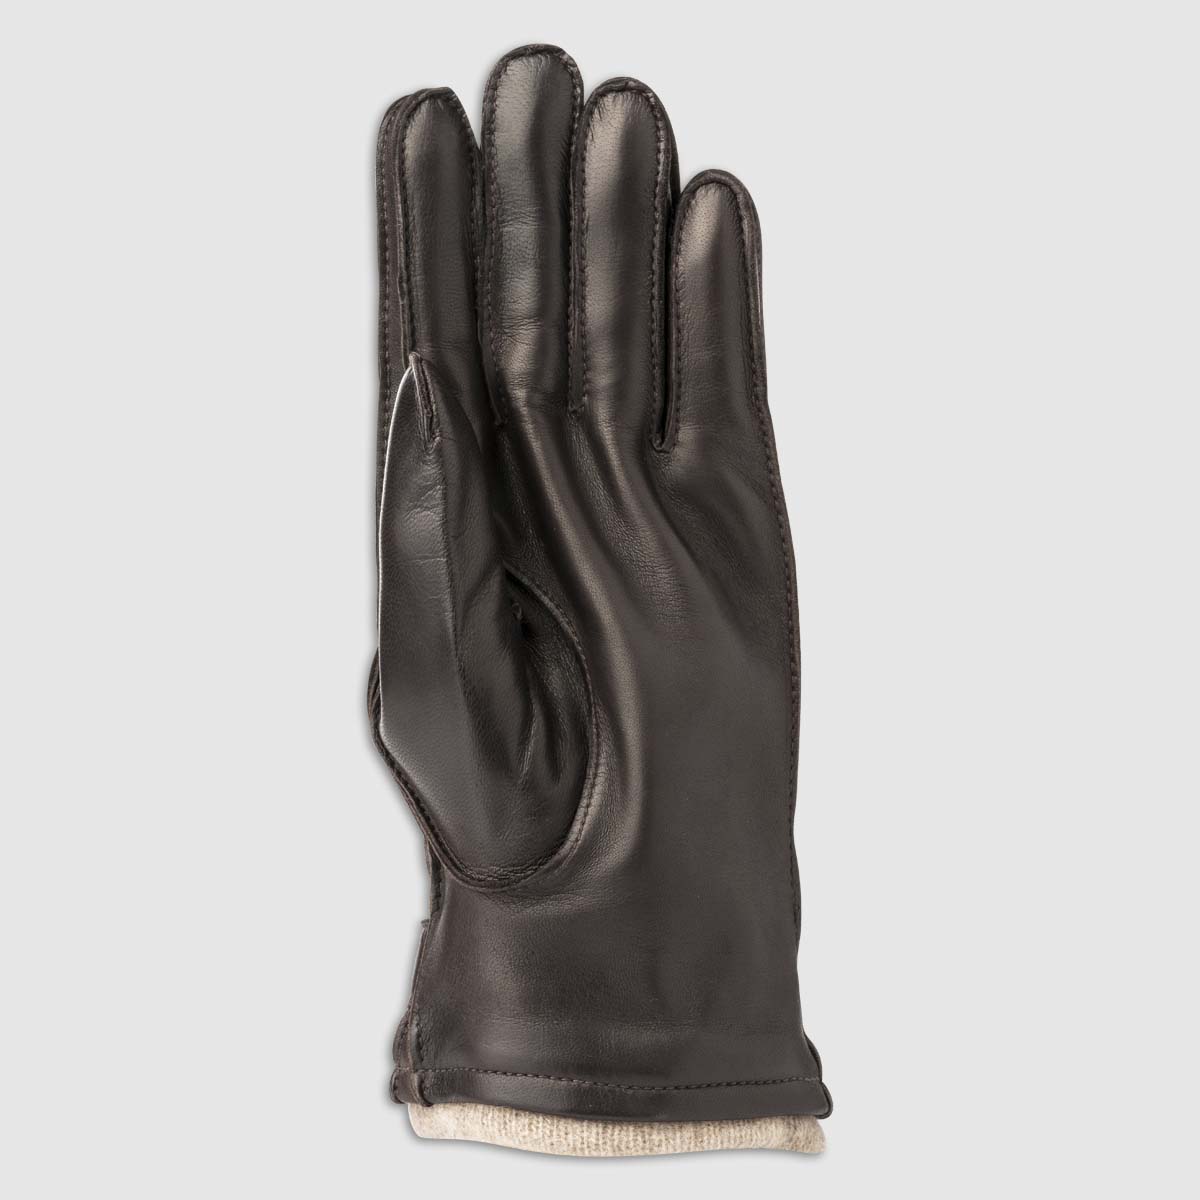 Nappa Leather Glove with Cashmere Lining in Mocca Alpo Guanti on sale 2022 2